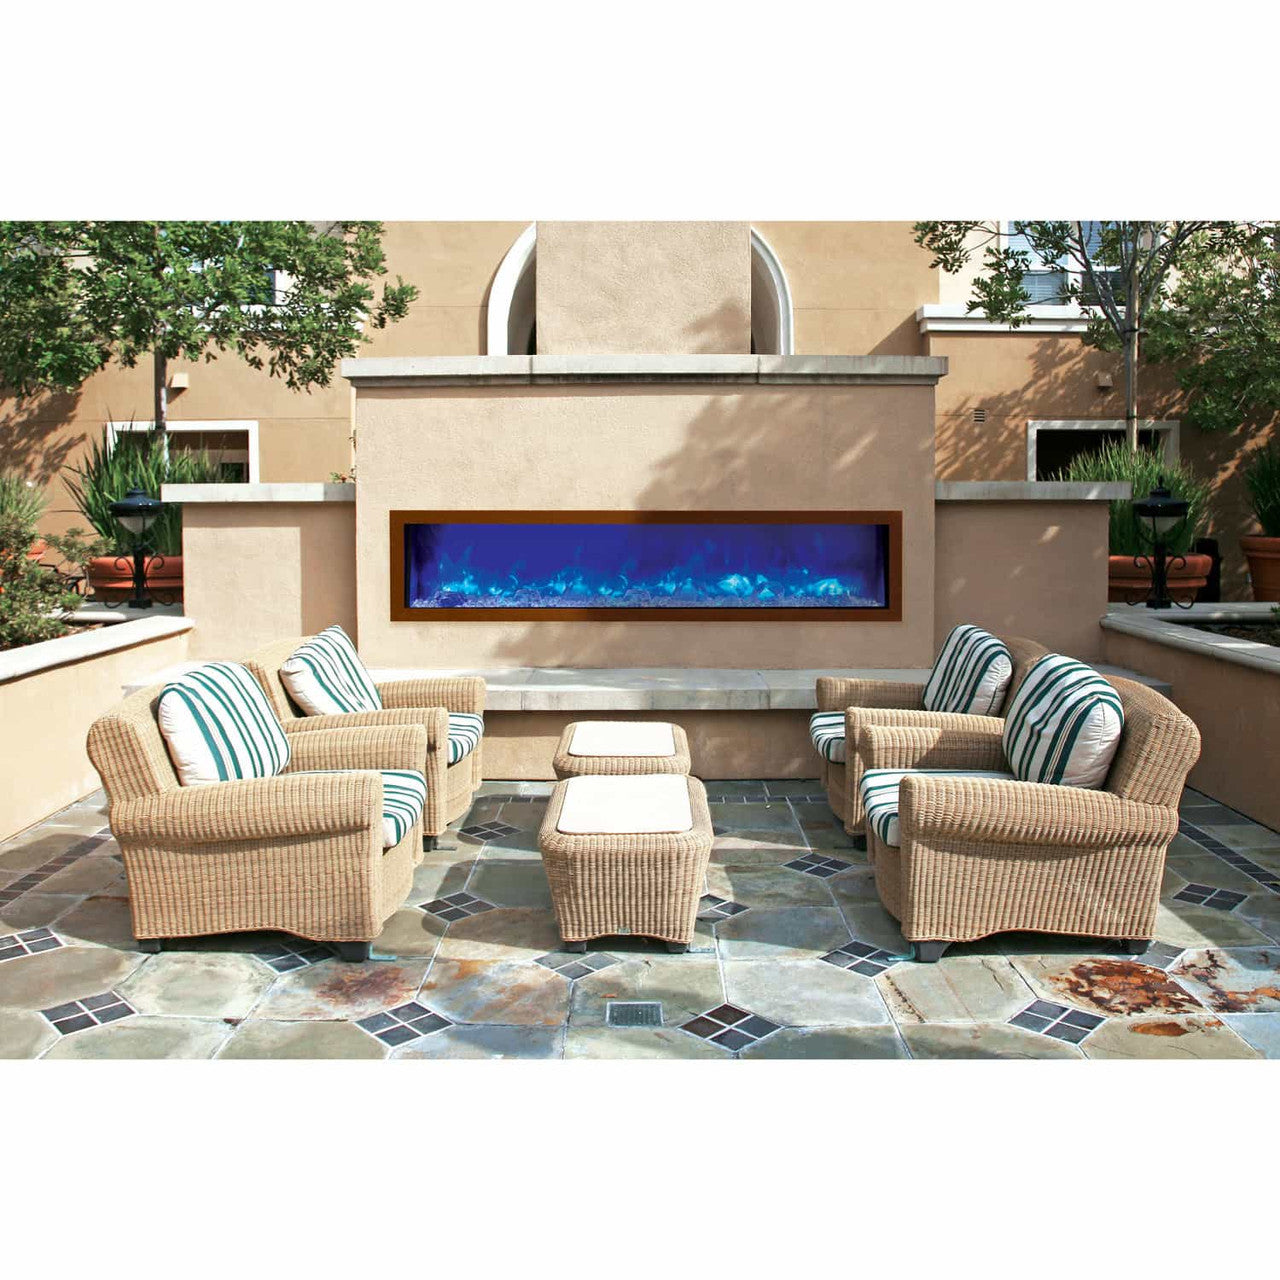 Amantii 72" Panorama Slim Indoor or Outdoor Electric Fireplace -BI-72-SLIM-OD- Lifestyle Patio With Fireplace Concrete Wall